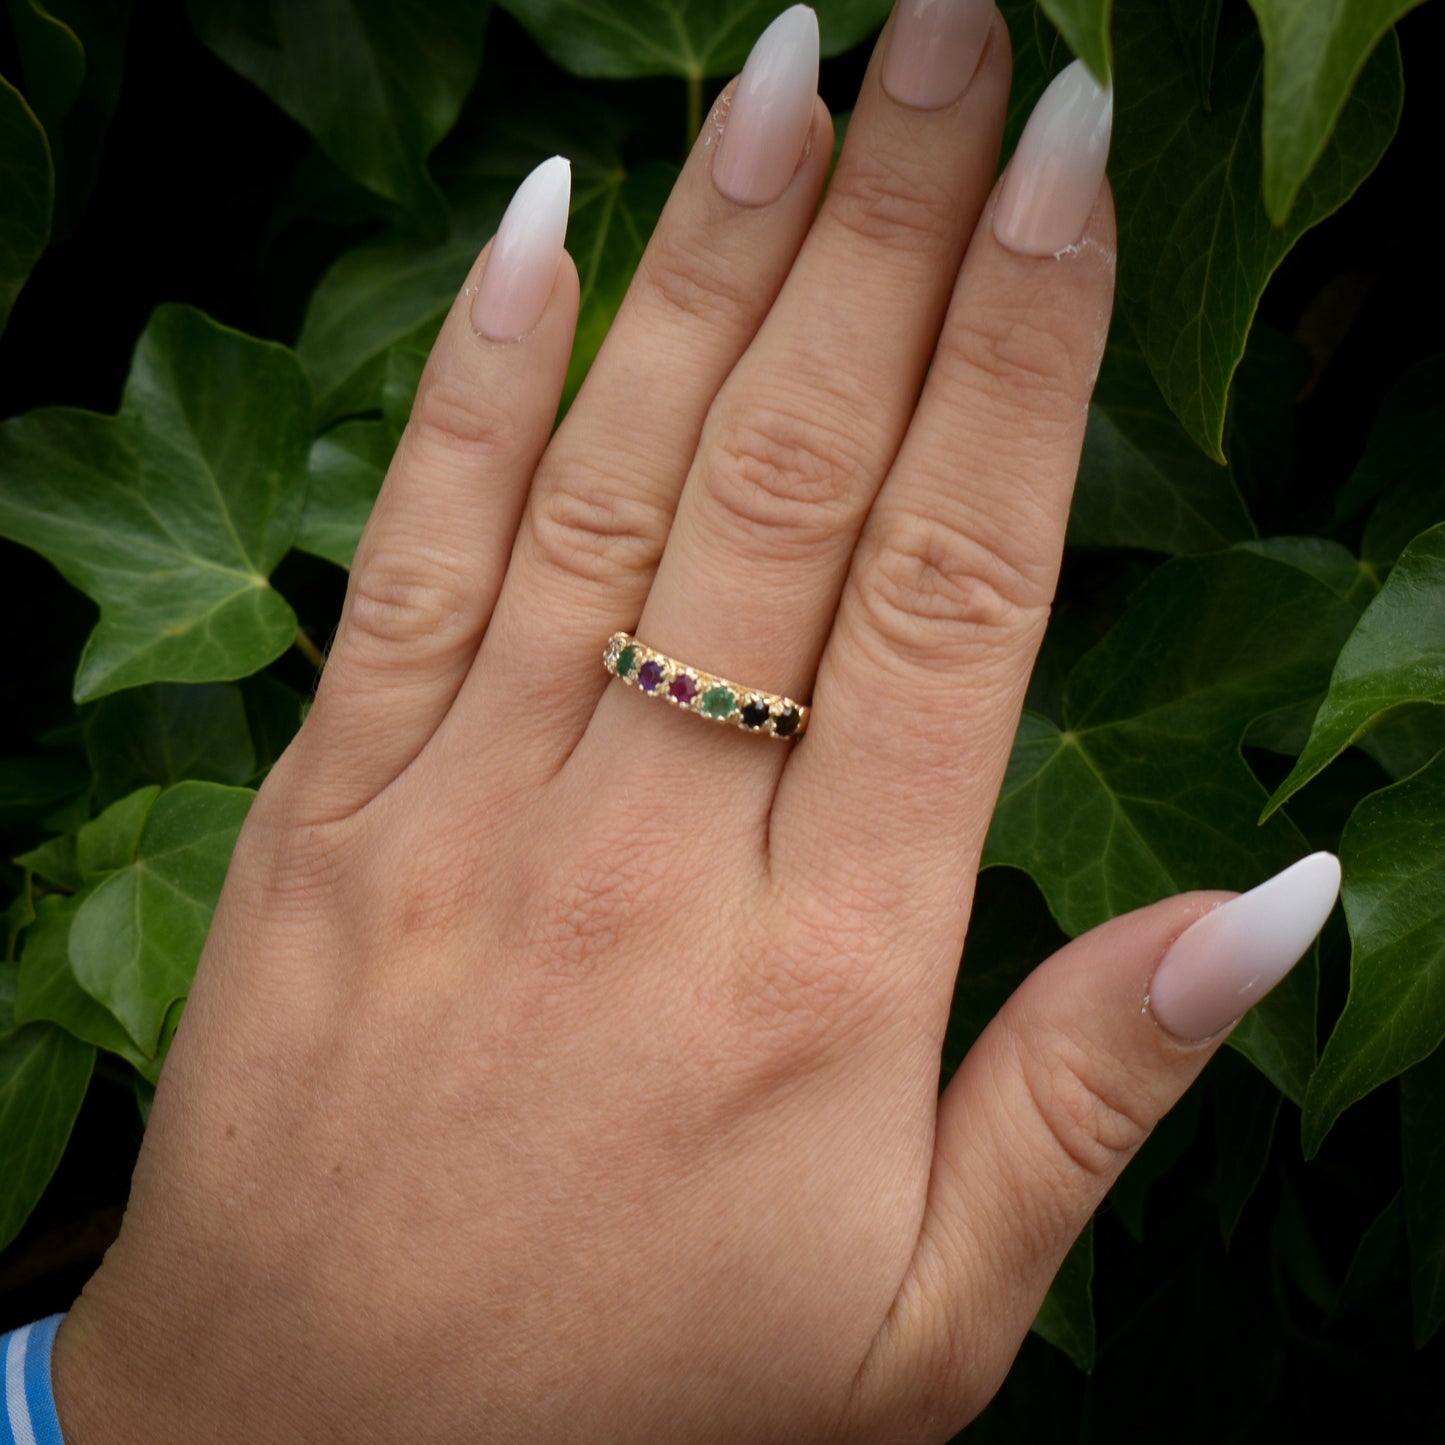 DEAREST Acrostic Multi Gemstone Gold Ring Band | Antique Style